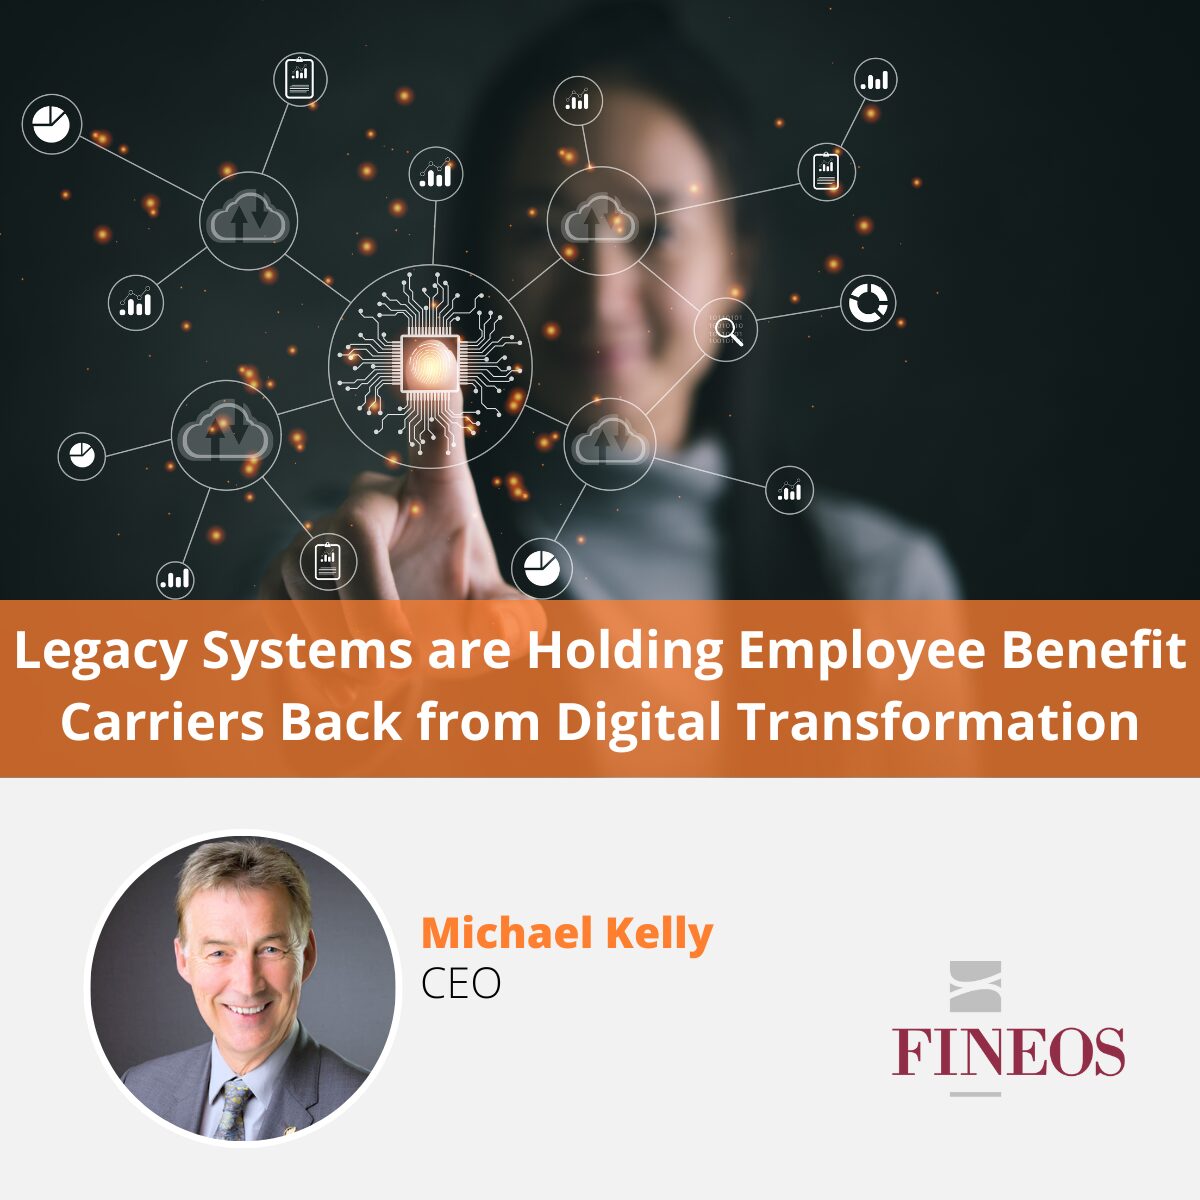 Legacy Systems are Holding Employee Benefit Carriers Back from Digital Transformation